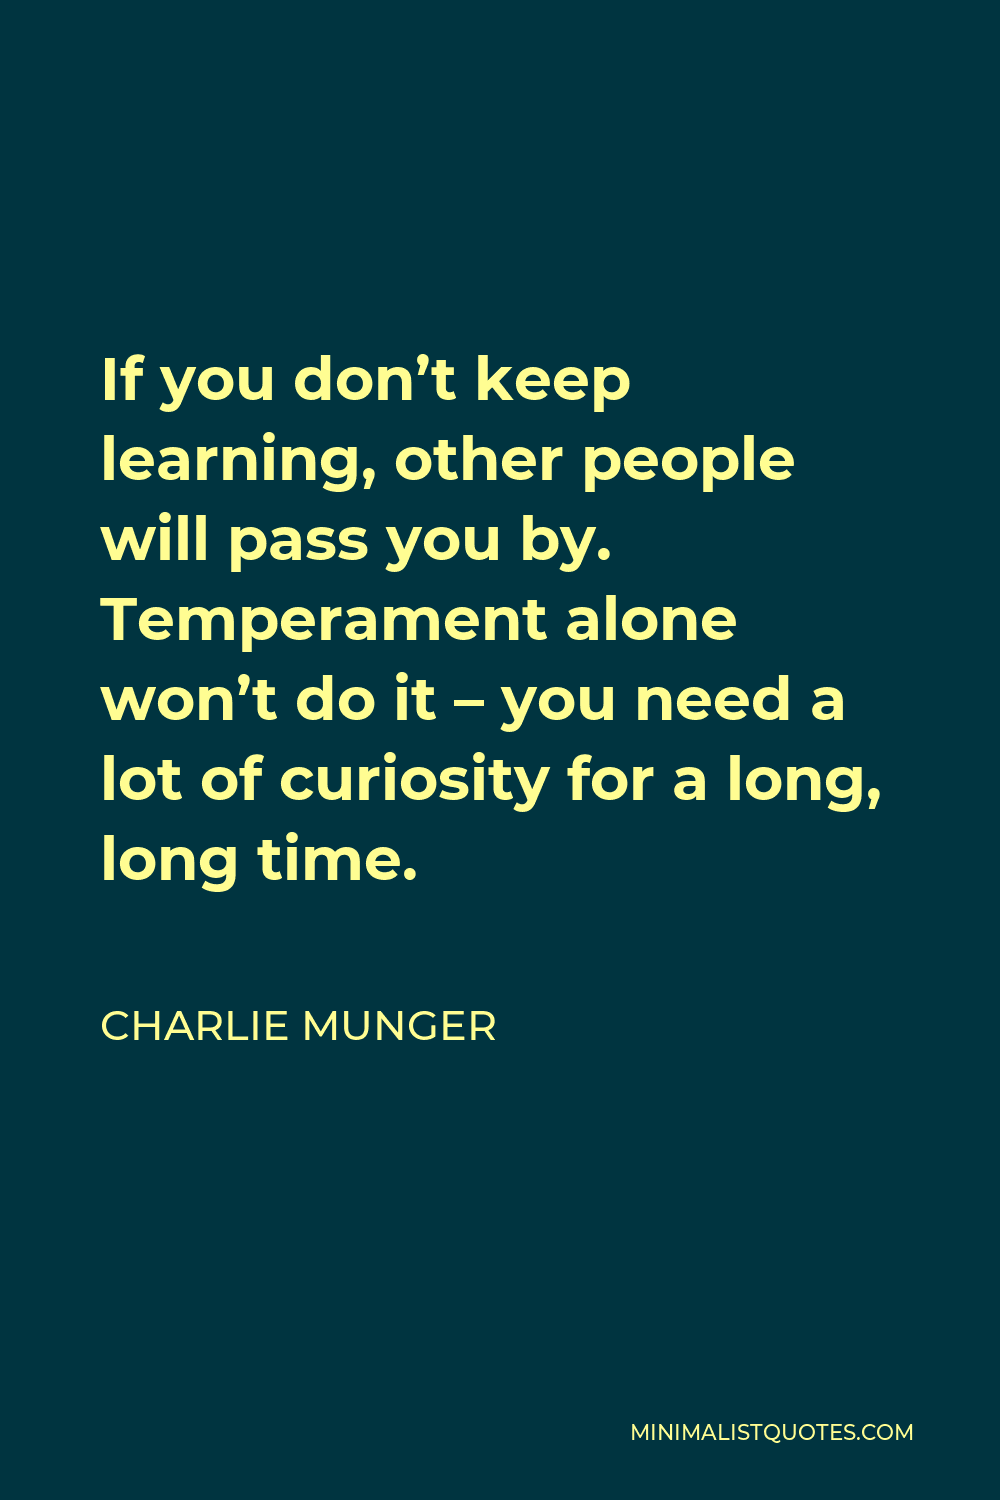 Charlie Munger Quote - If you don’t keep learning, other people will pass you by. Temperament alone won’t do it – you need a lot of curiosity for a long, long time.